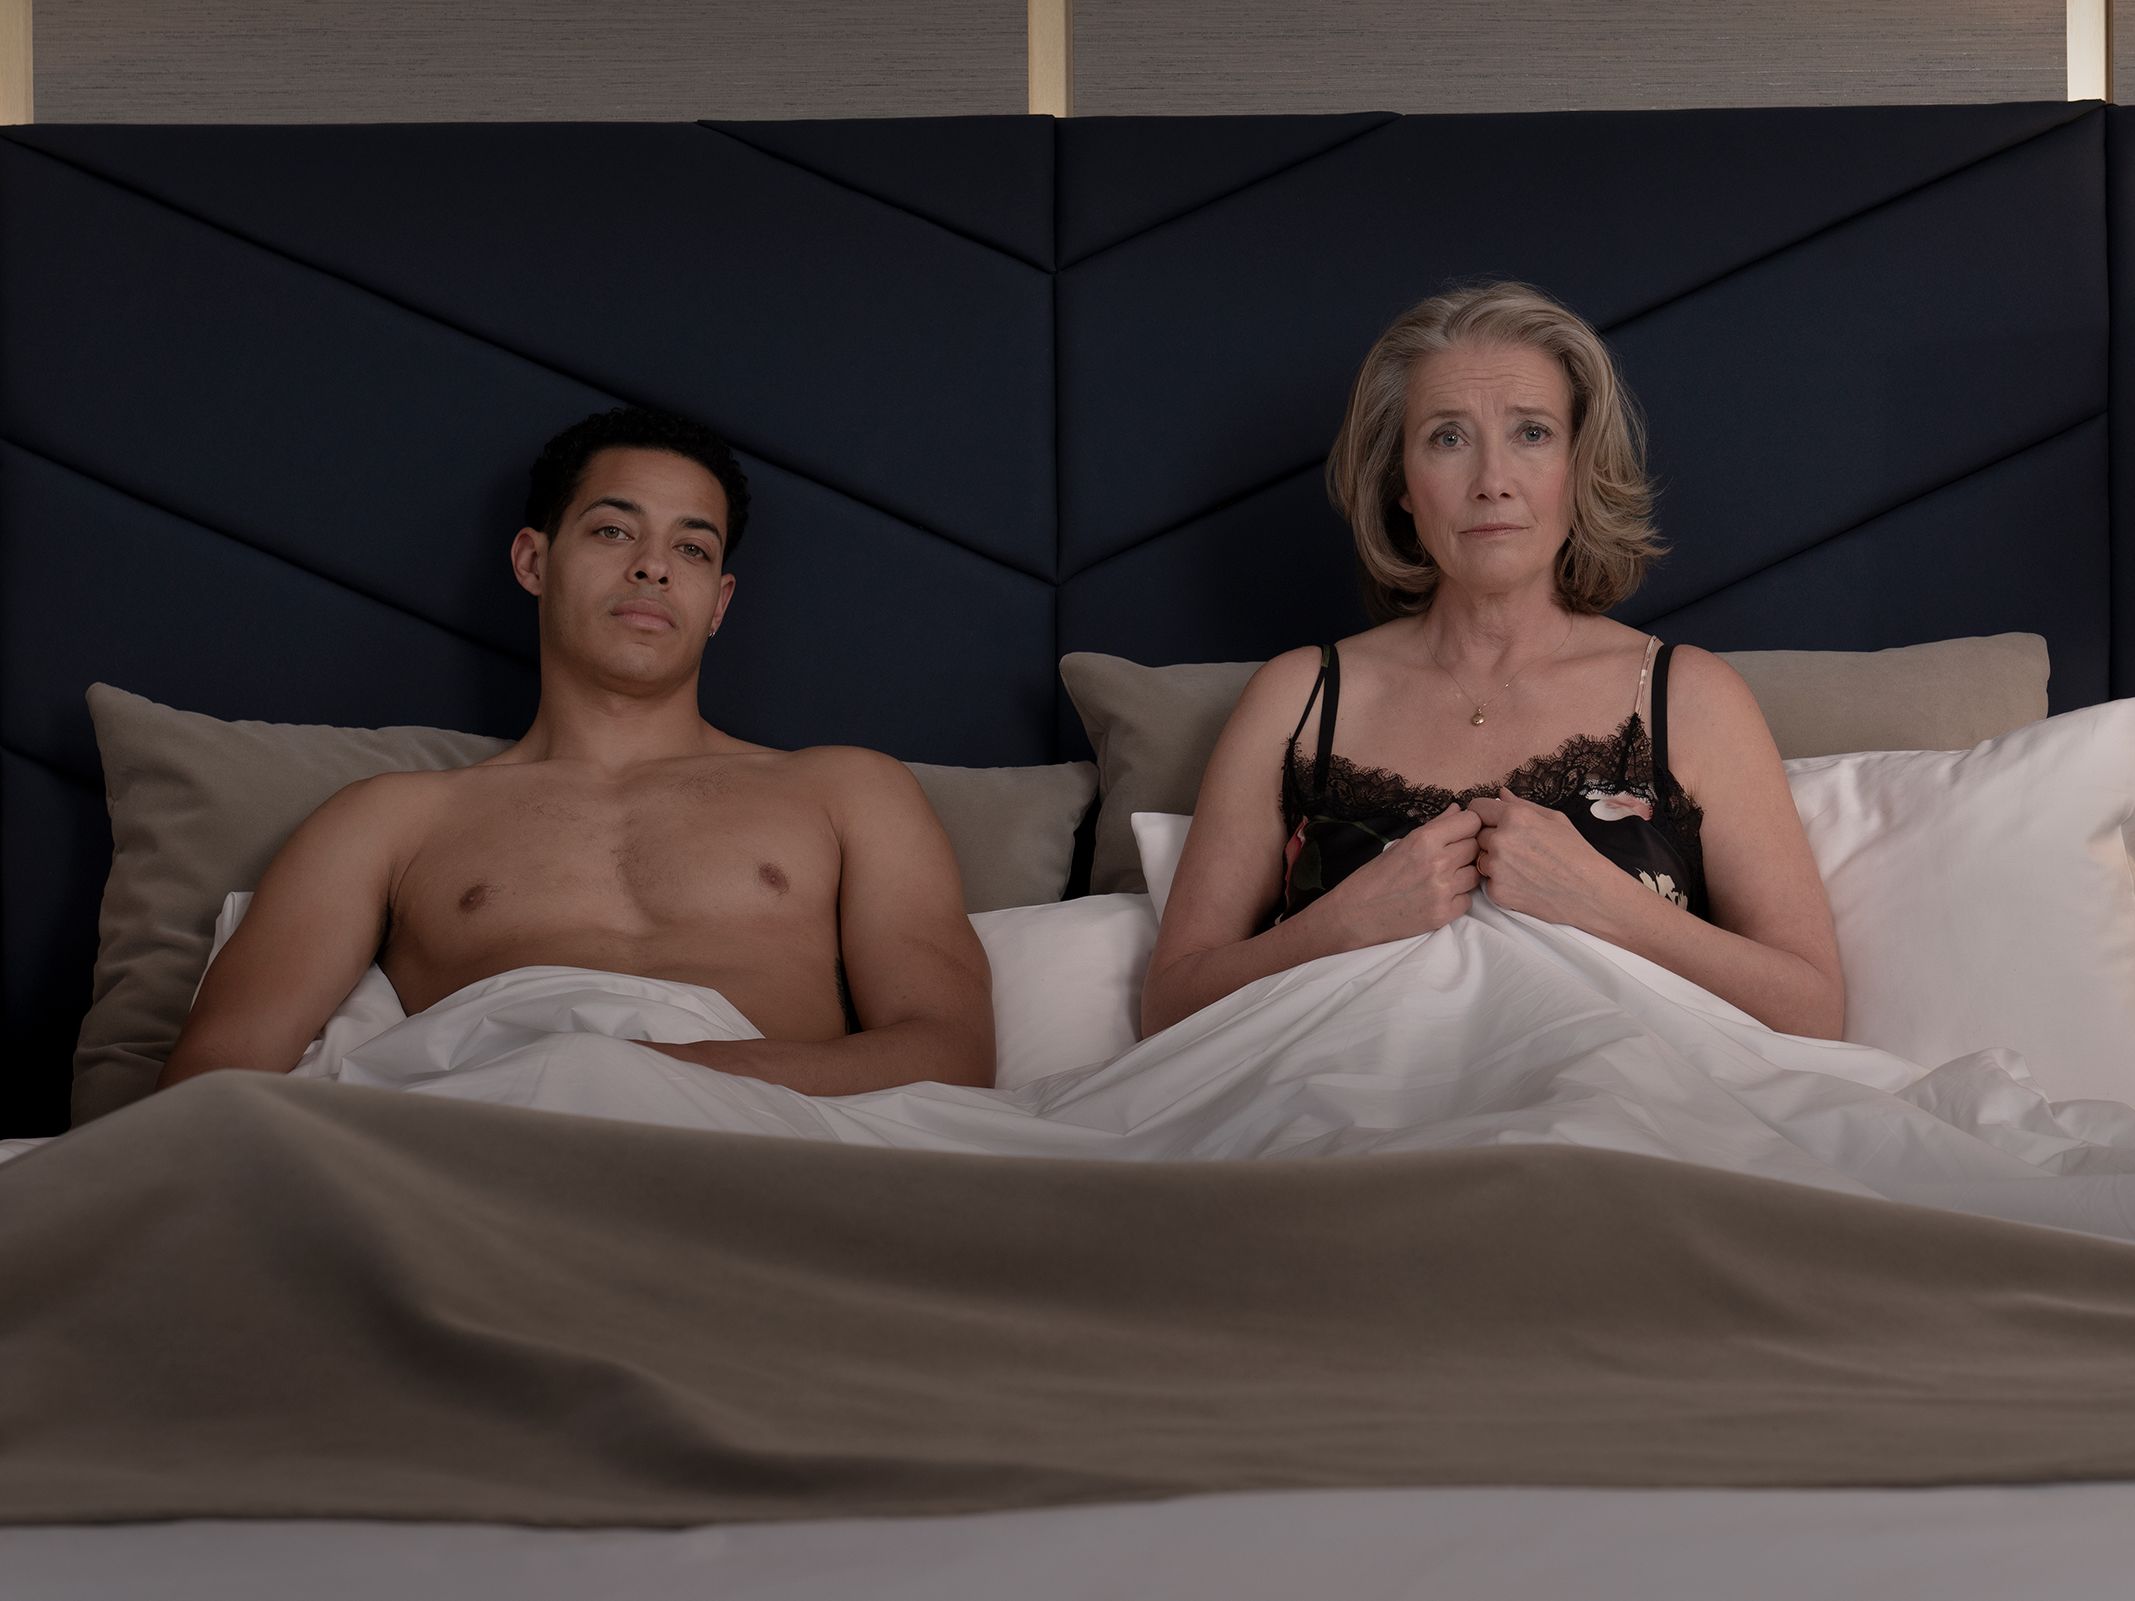 Cum On Nude Beach Sex - Opinion: Emma Thompson's new film captures the truth about sex | CNN